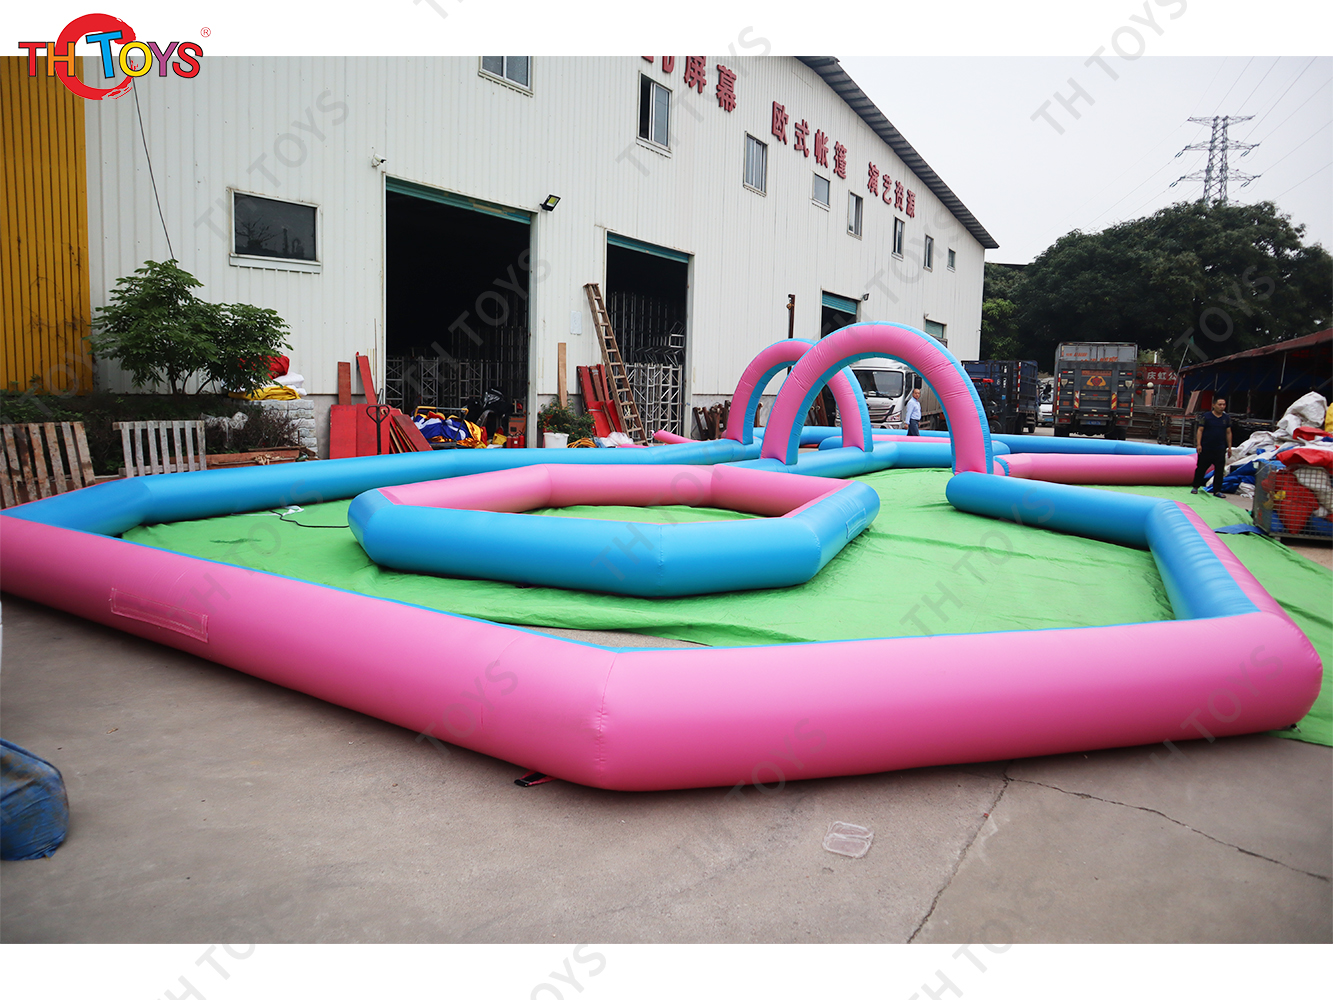 New inflatable go kart race track inflatable zorbball race track, inflatable bumper cars racing track